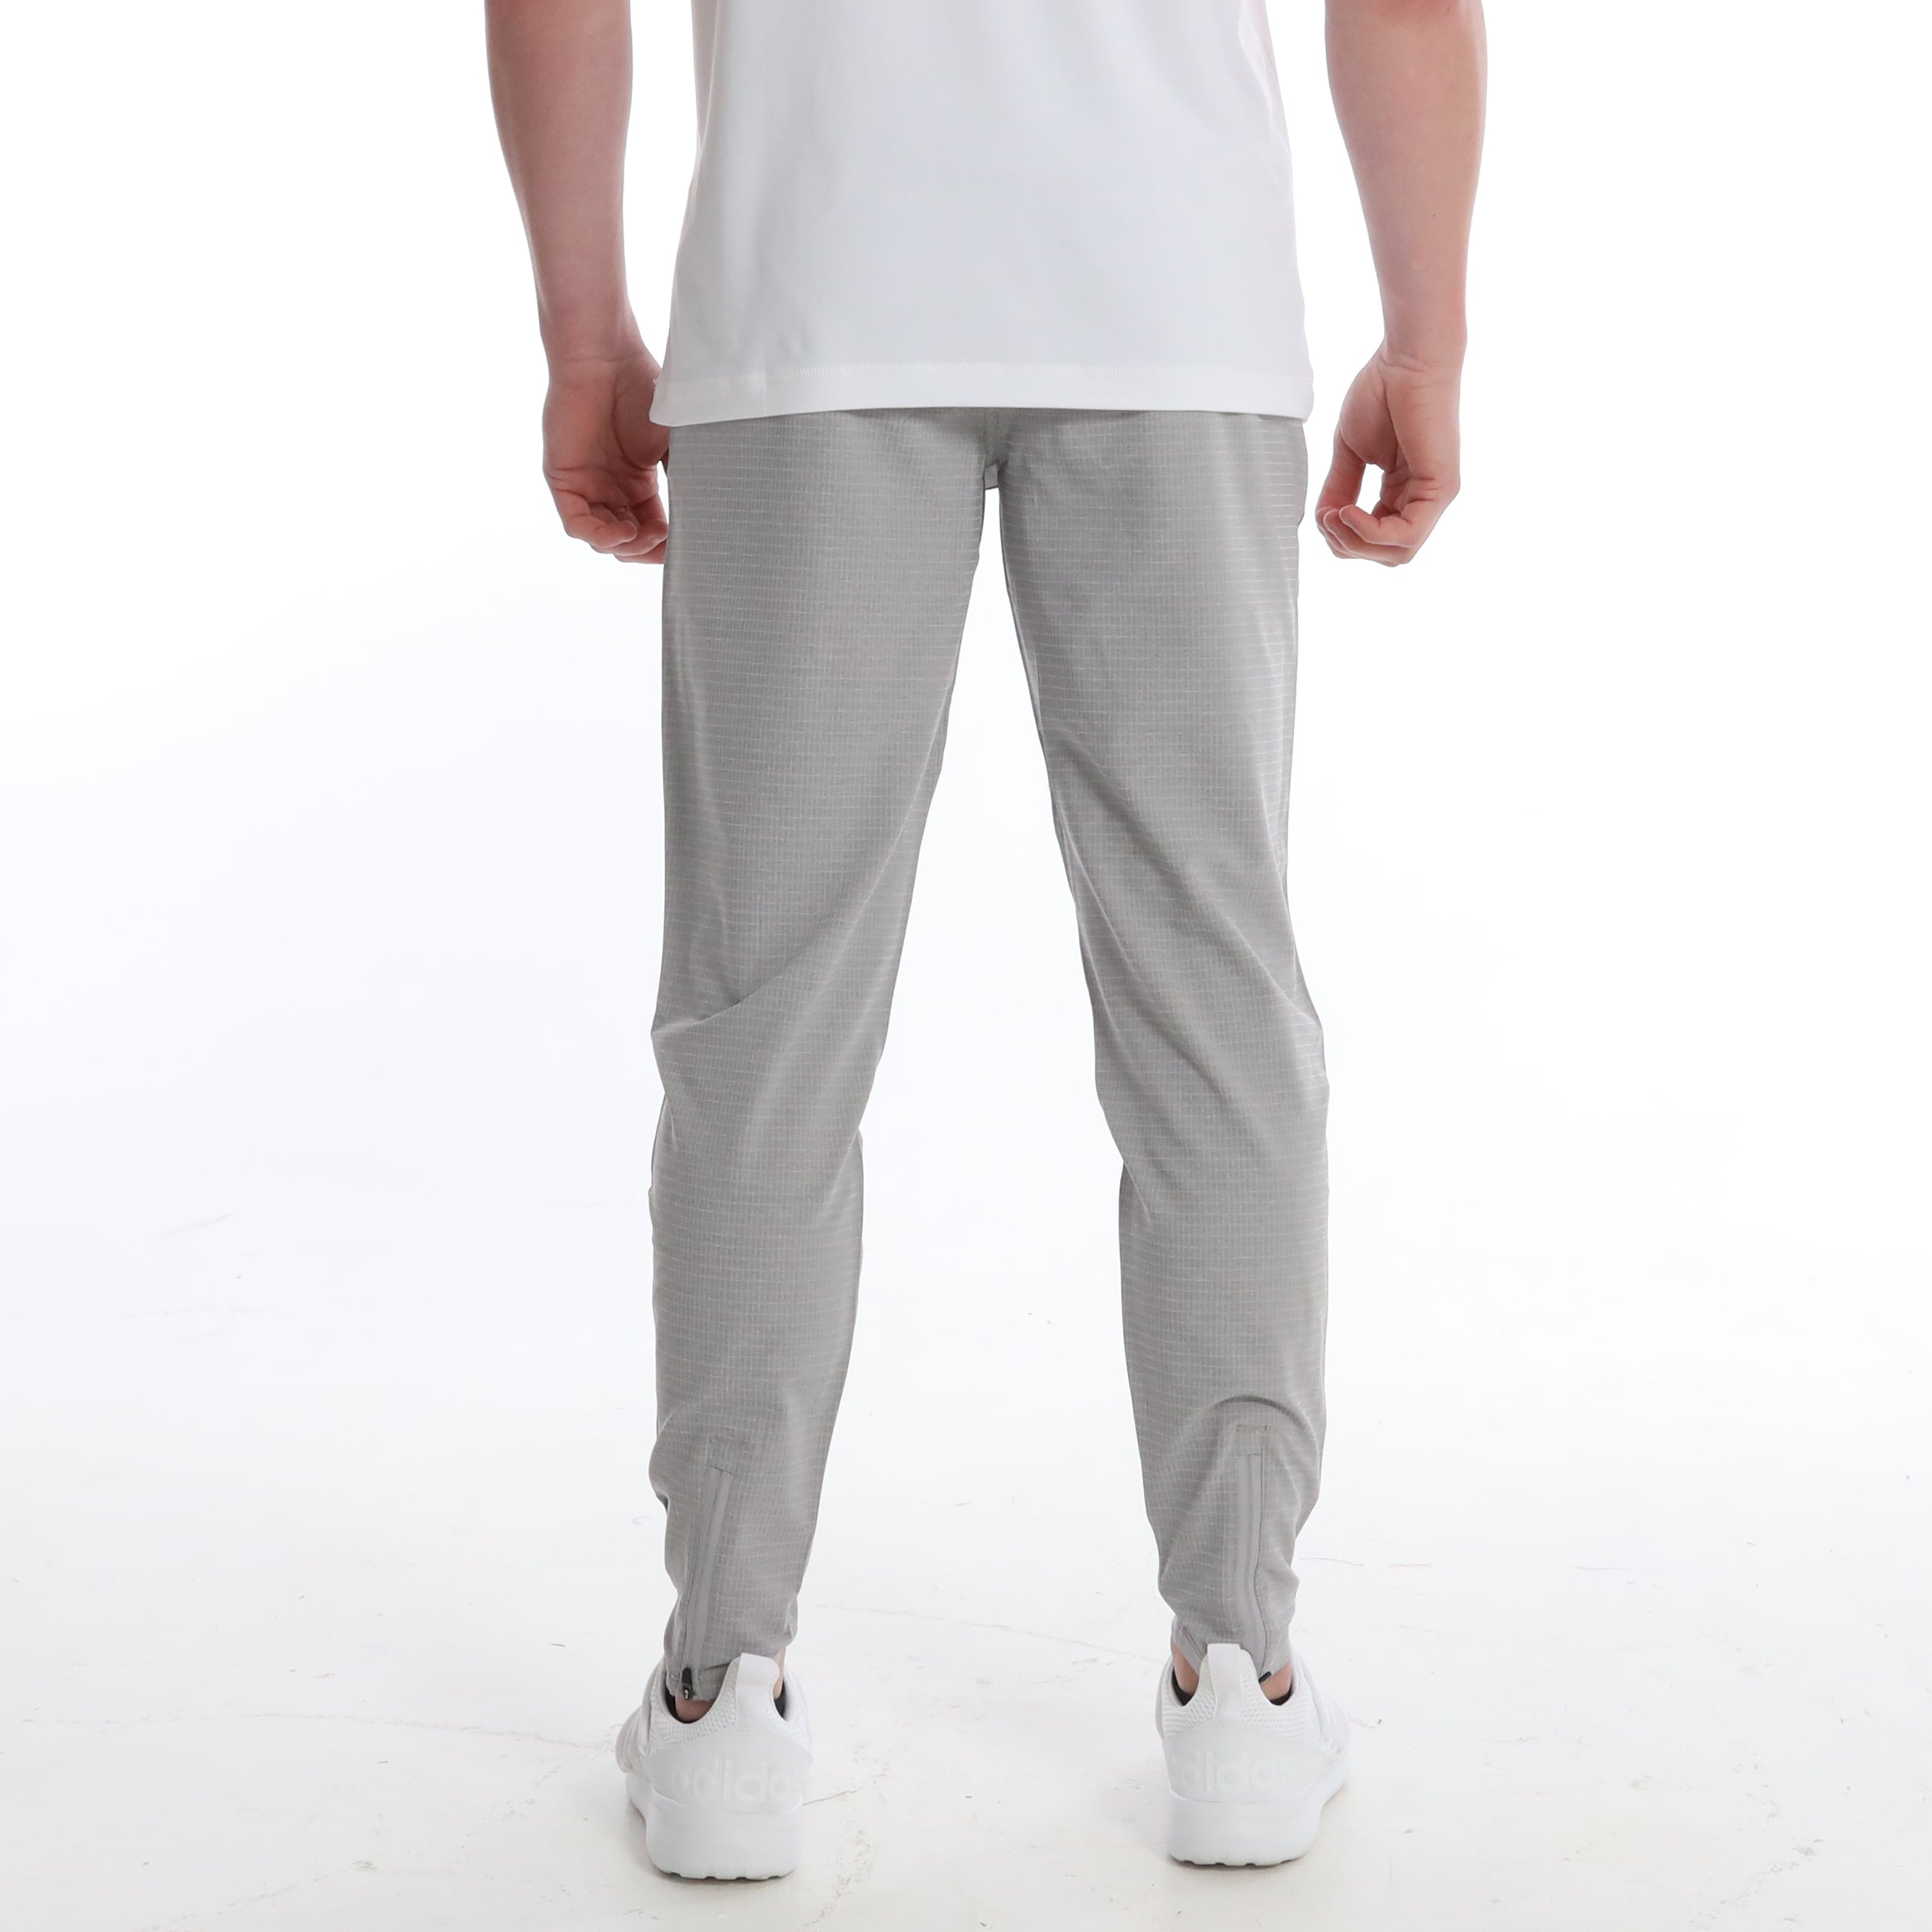 SOLUTION PANT - GREY HEATHER